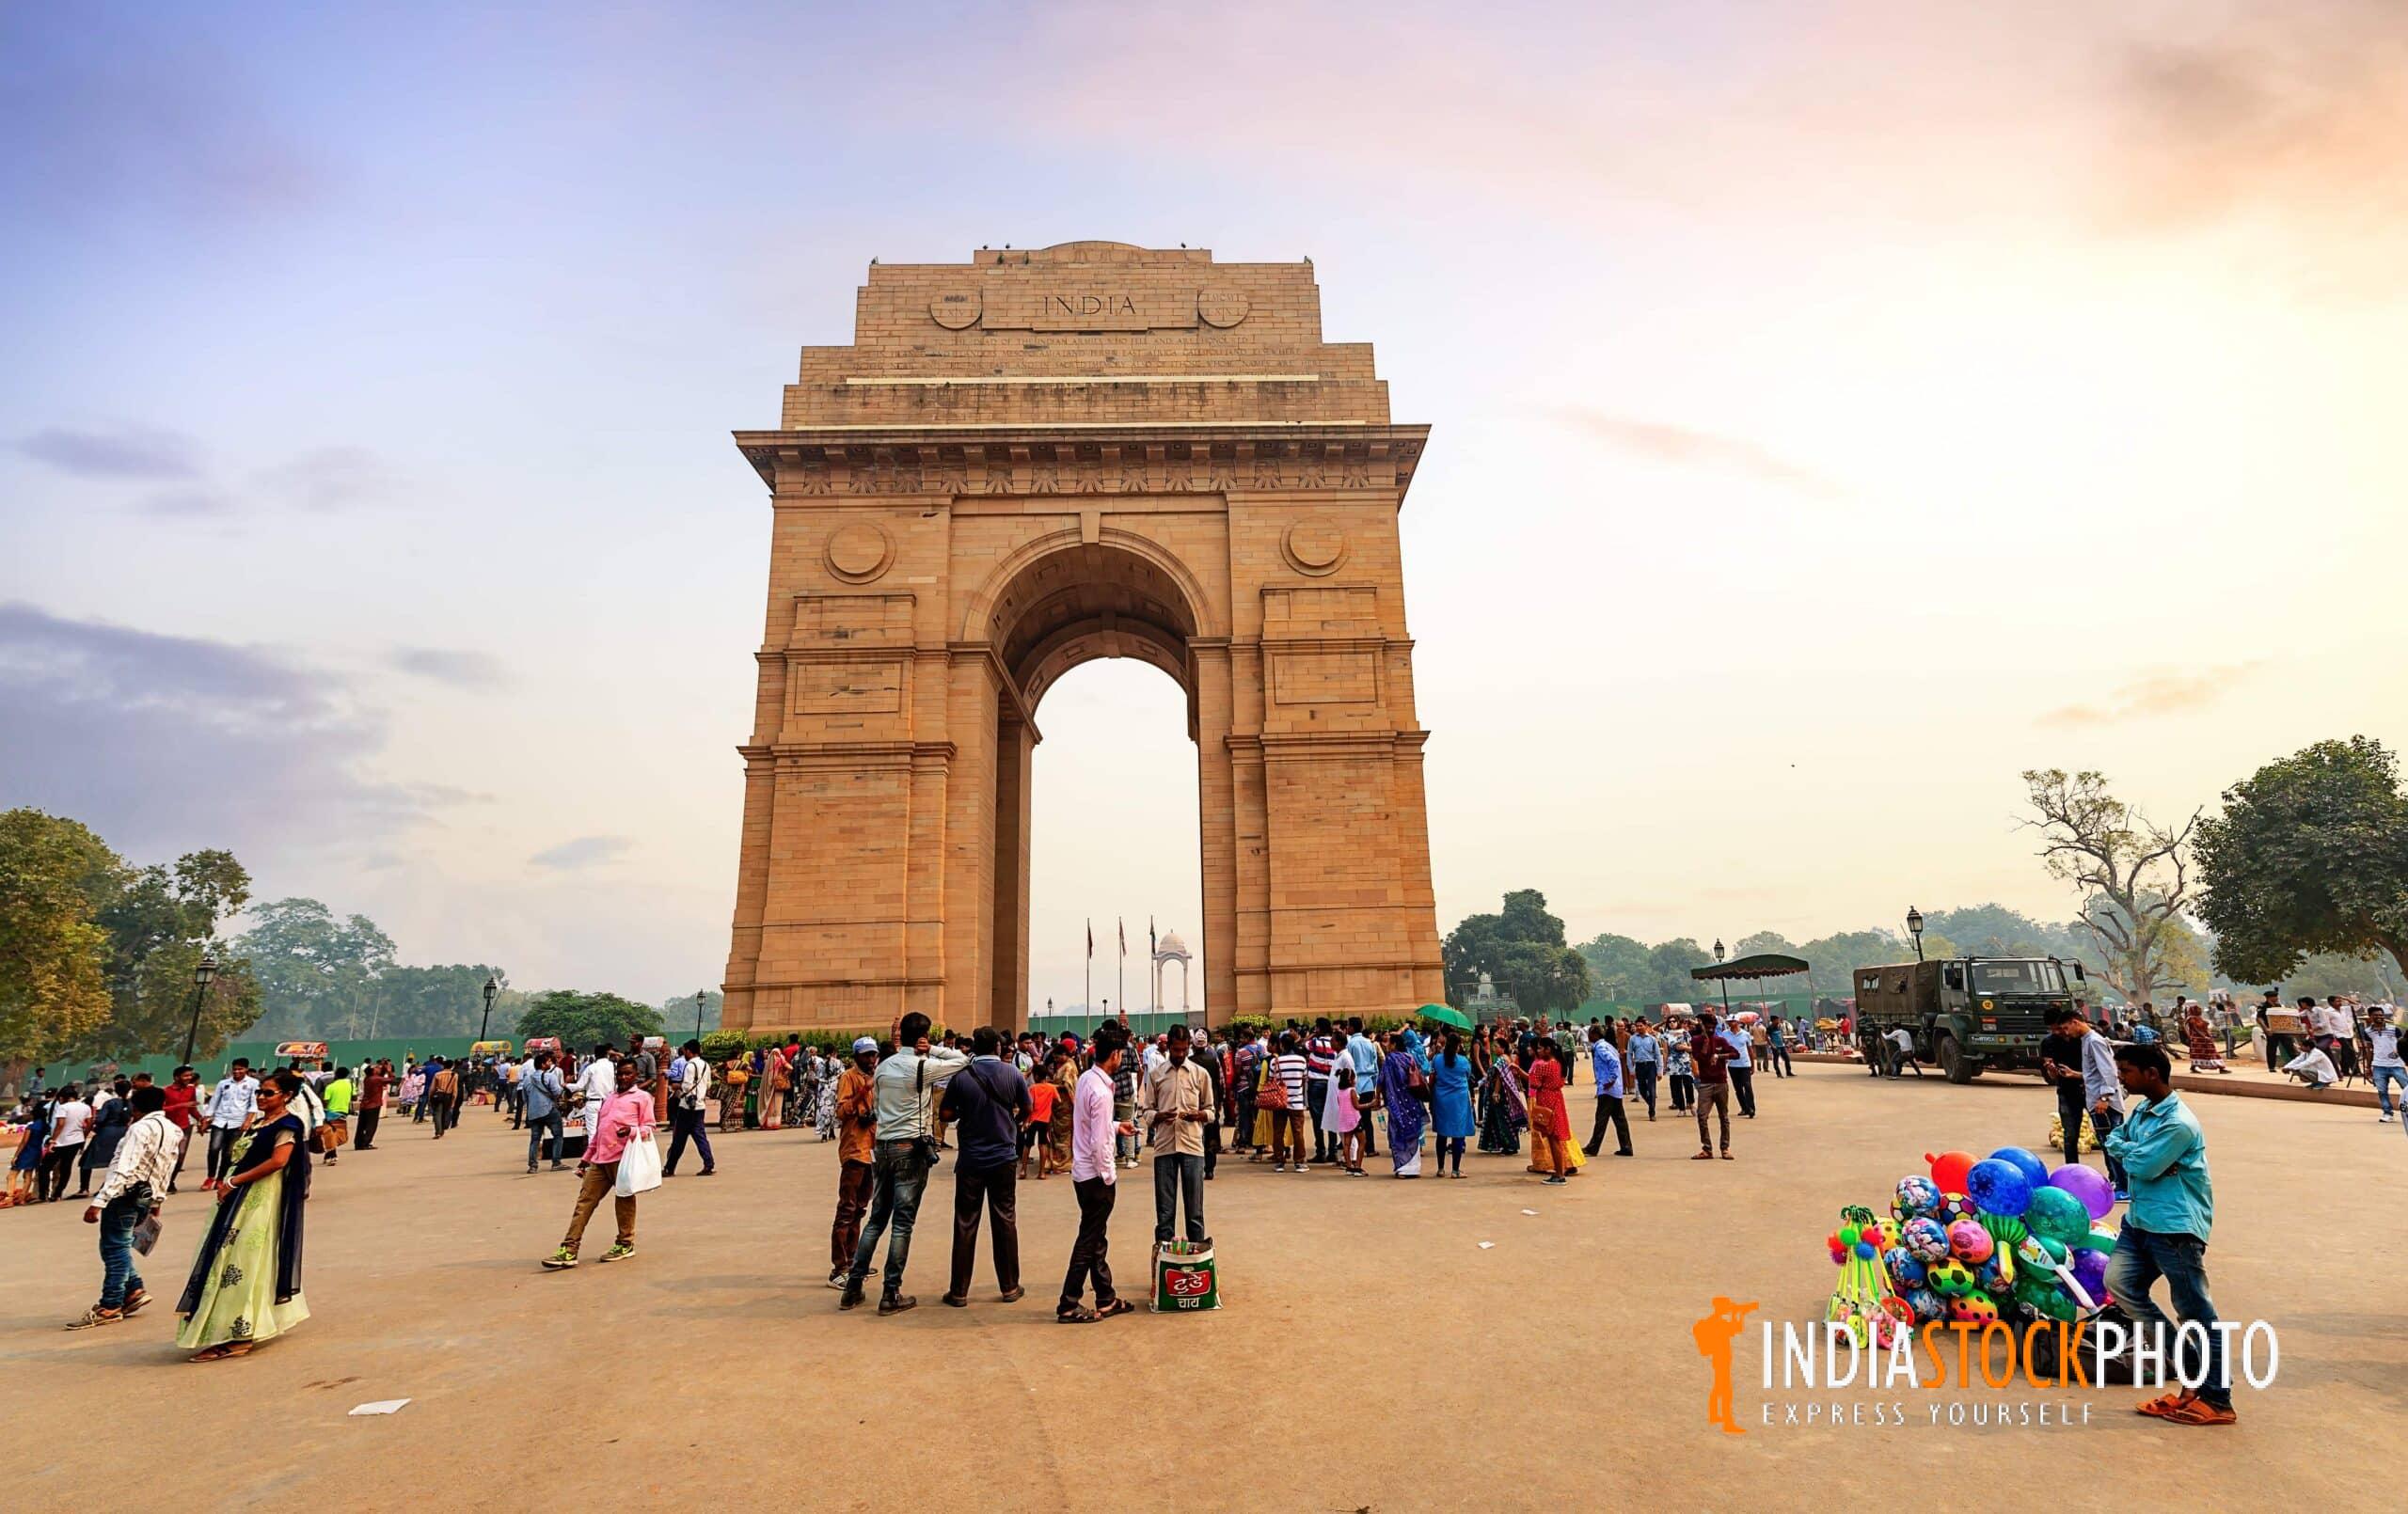 India Gate New Delhi with tourists at sunset